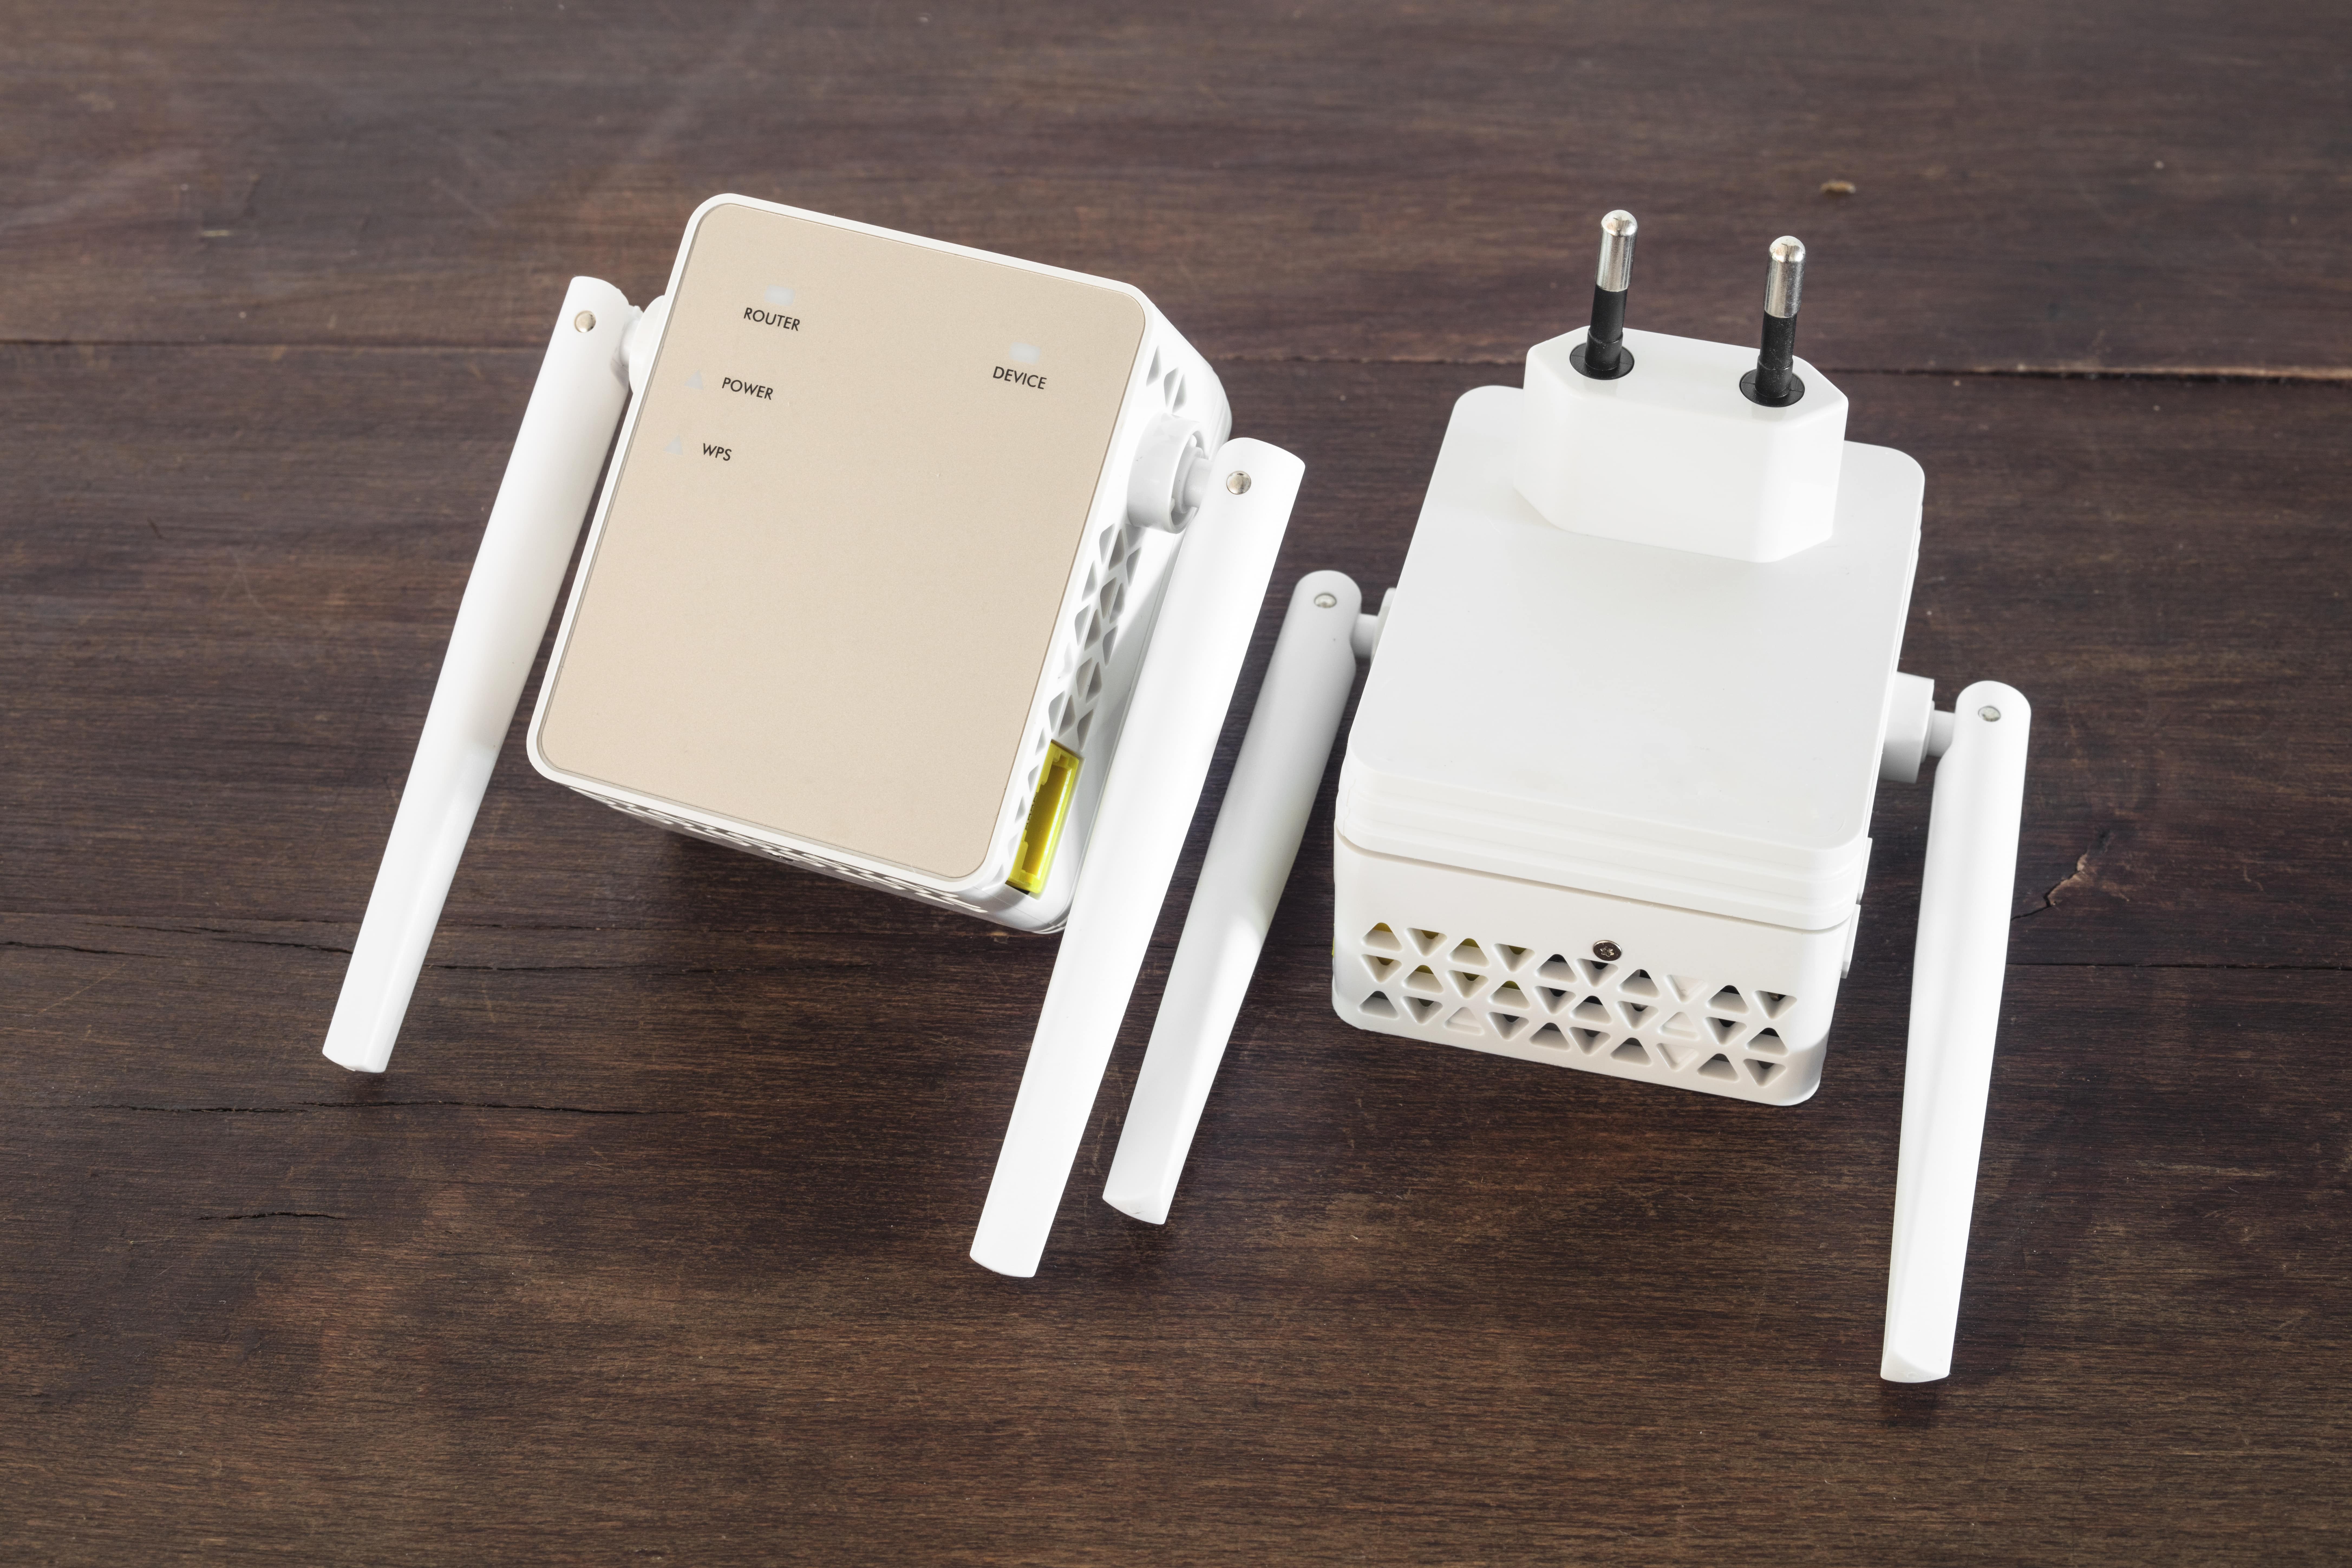 Which devices are the best at extending WiFi coverage? If you’re looking to extend your WiFi range, check out which types of equipment are the best at doing so.